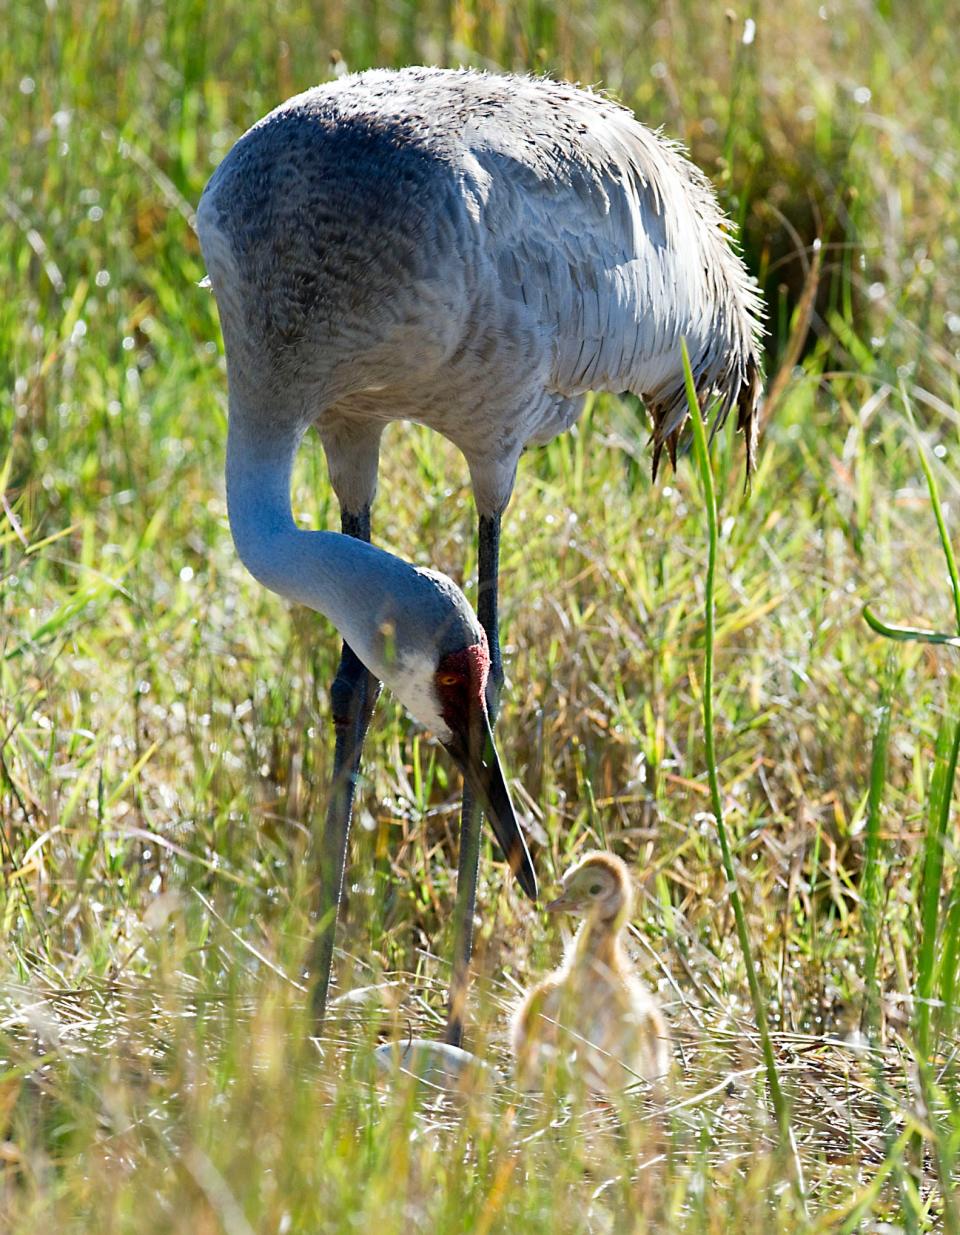 Spring has sprung in the Sunshine State and many species of wildlife are beginning to migrate, mate, feed, nest and give birth. In this photo, taken April 2, 2014,  a sandhill crane tends to its newborn at the nest it shares with its mate in Jensen Beach.